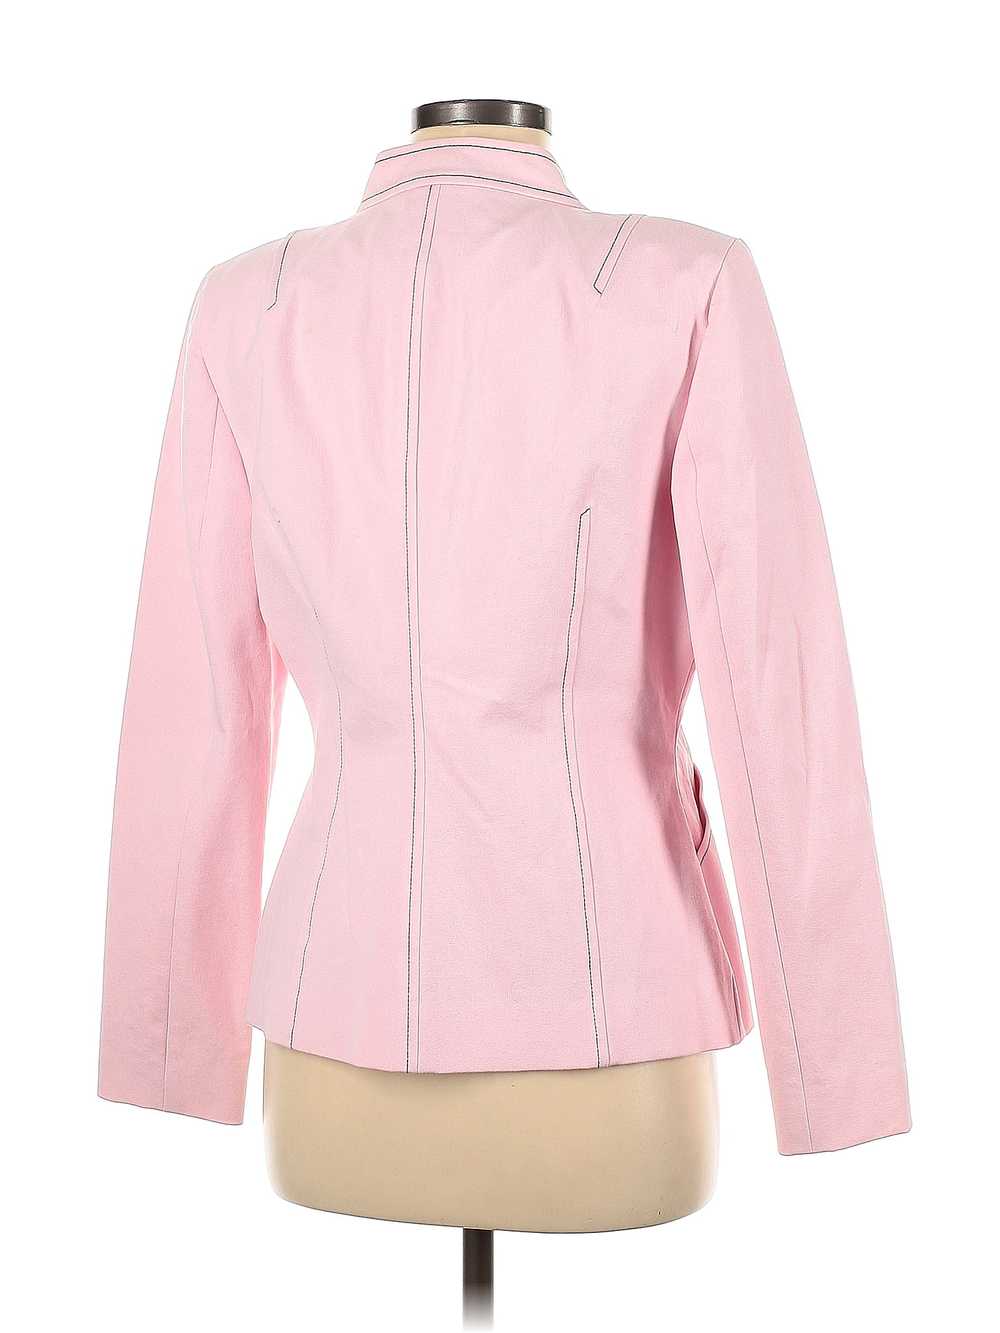 Collection Women Pink Jacket 8 - image 2